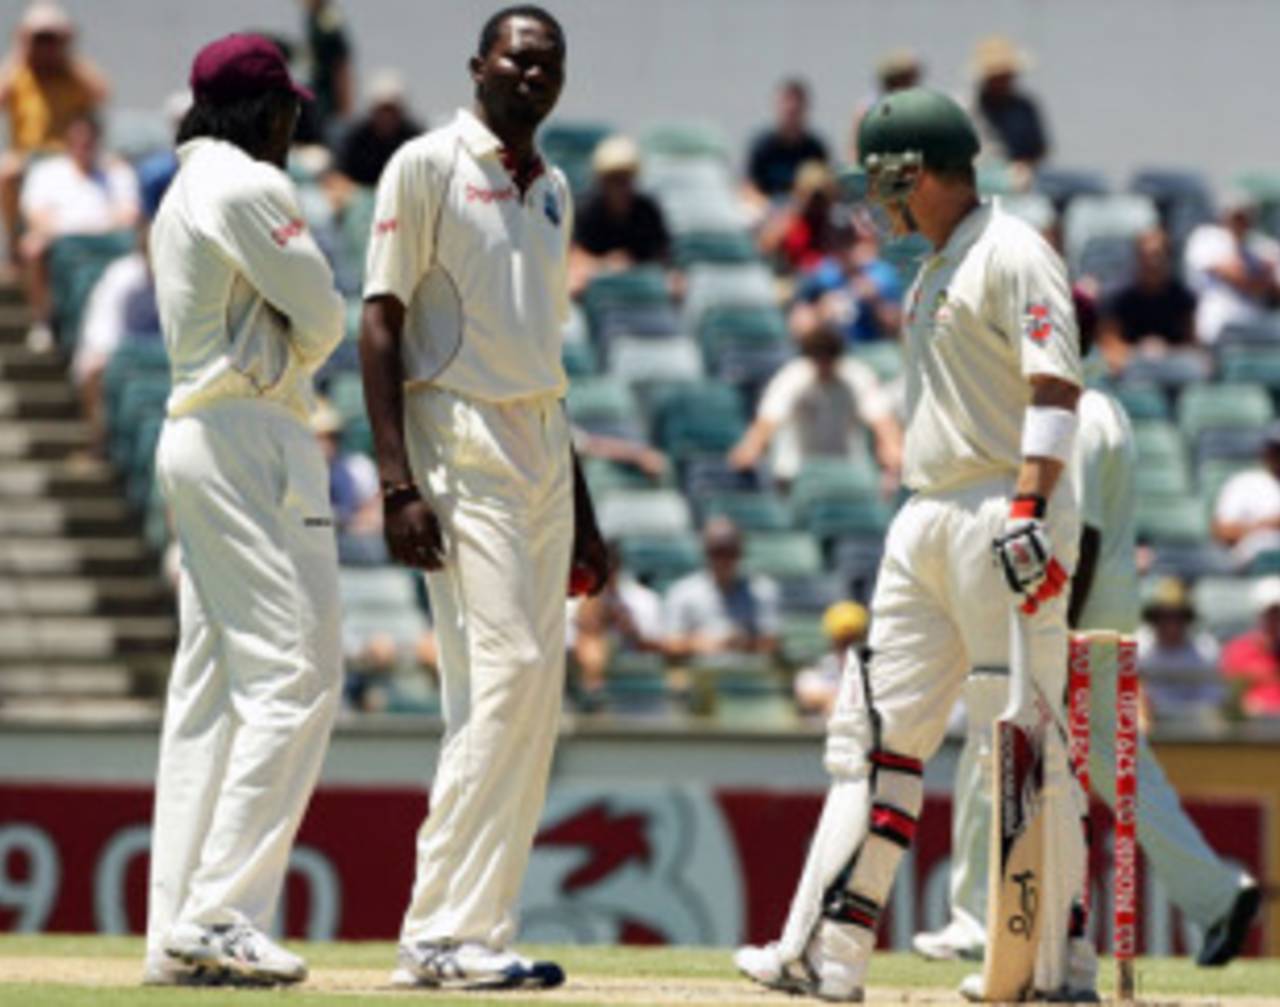 Brad Haddin said he realised his animated approach to Sulieman Benn was not appropriate&nbsp;&nbsp;&bull;&nbsp;&nbsp;Getty Images